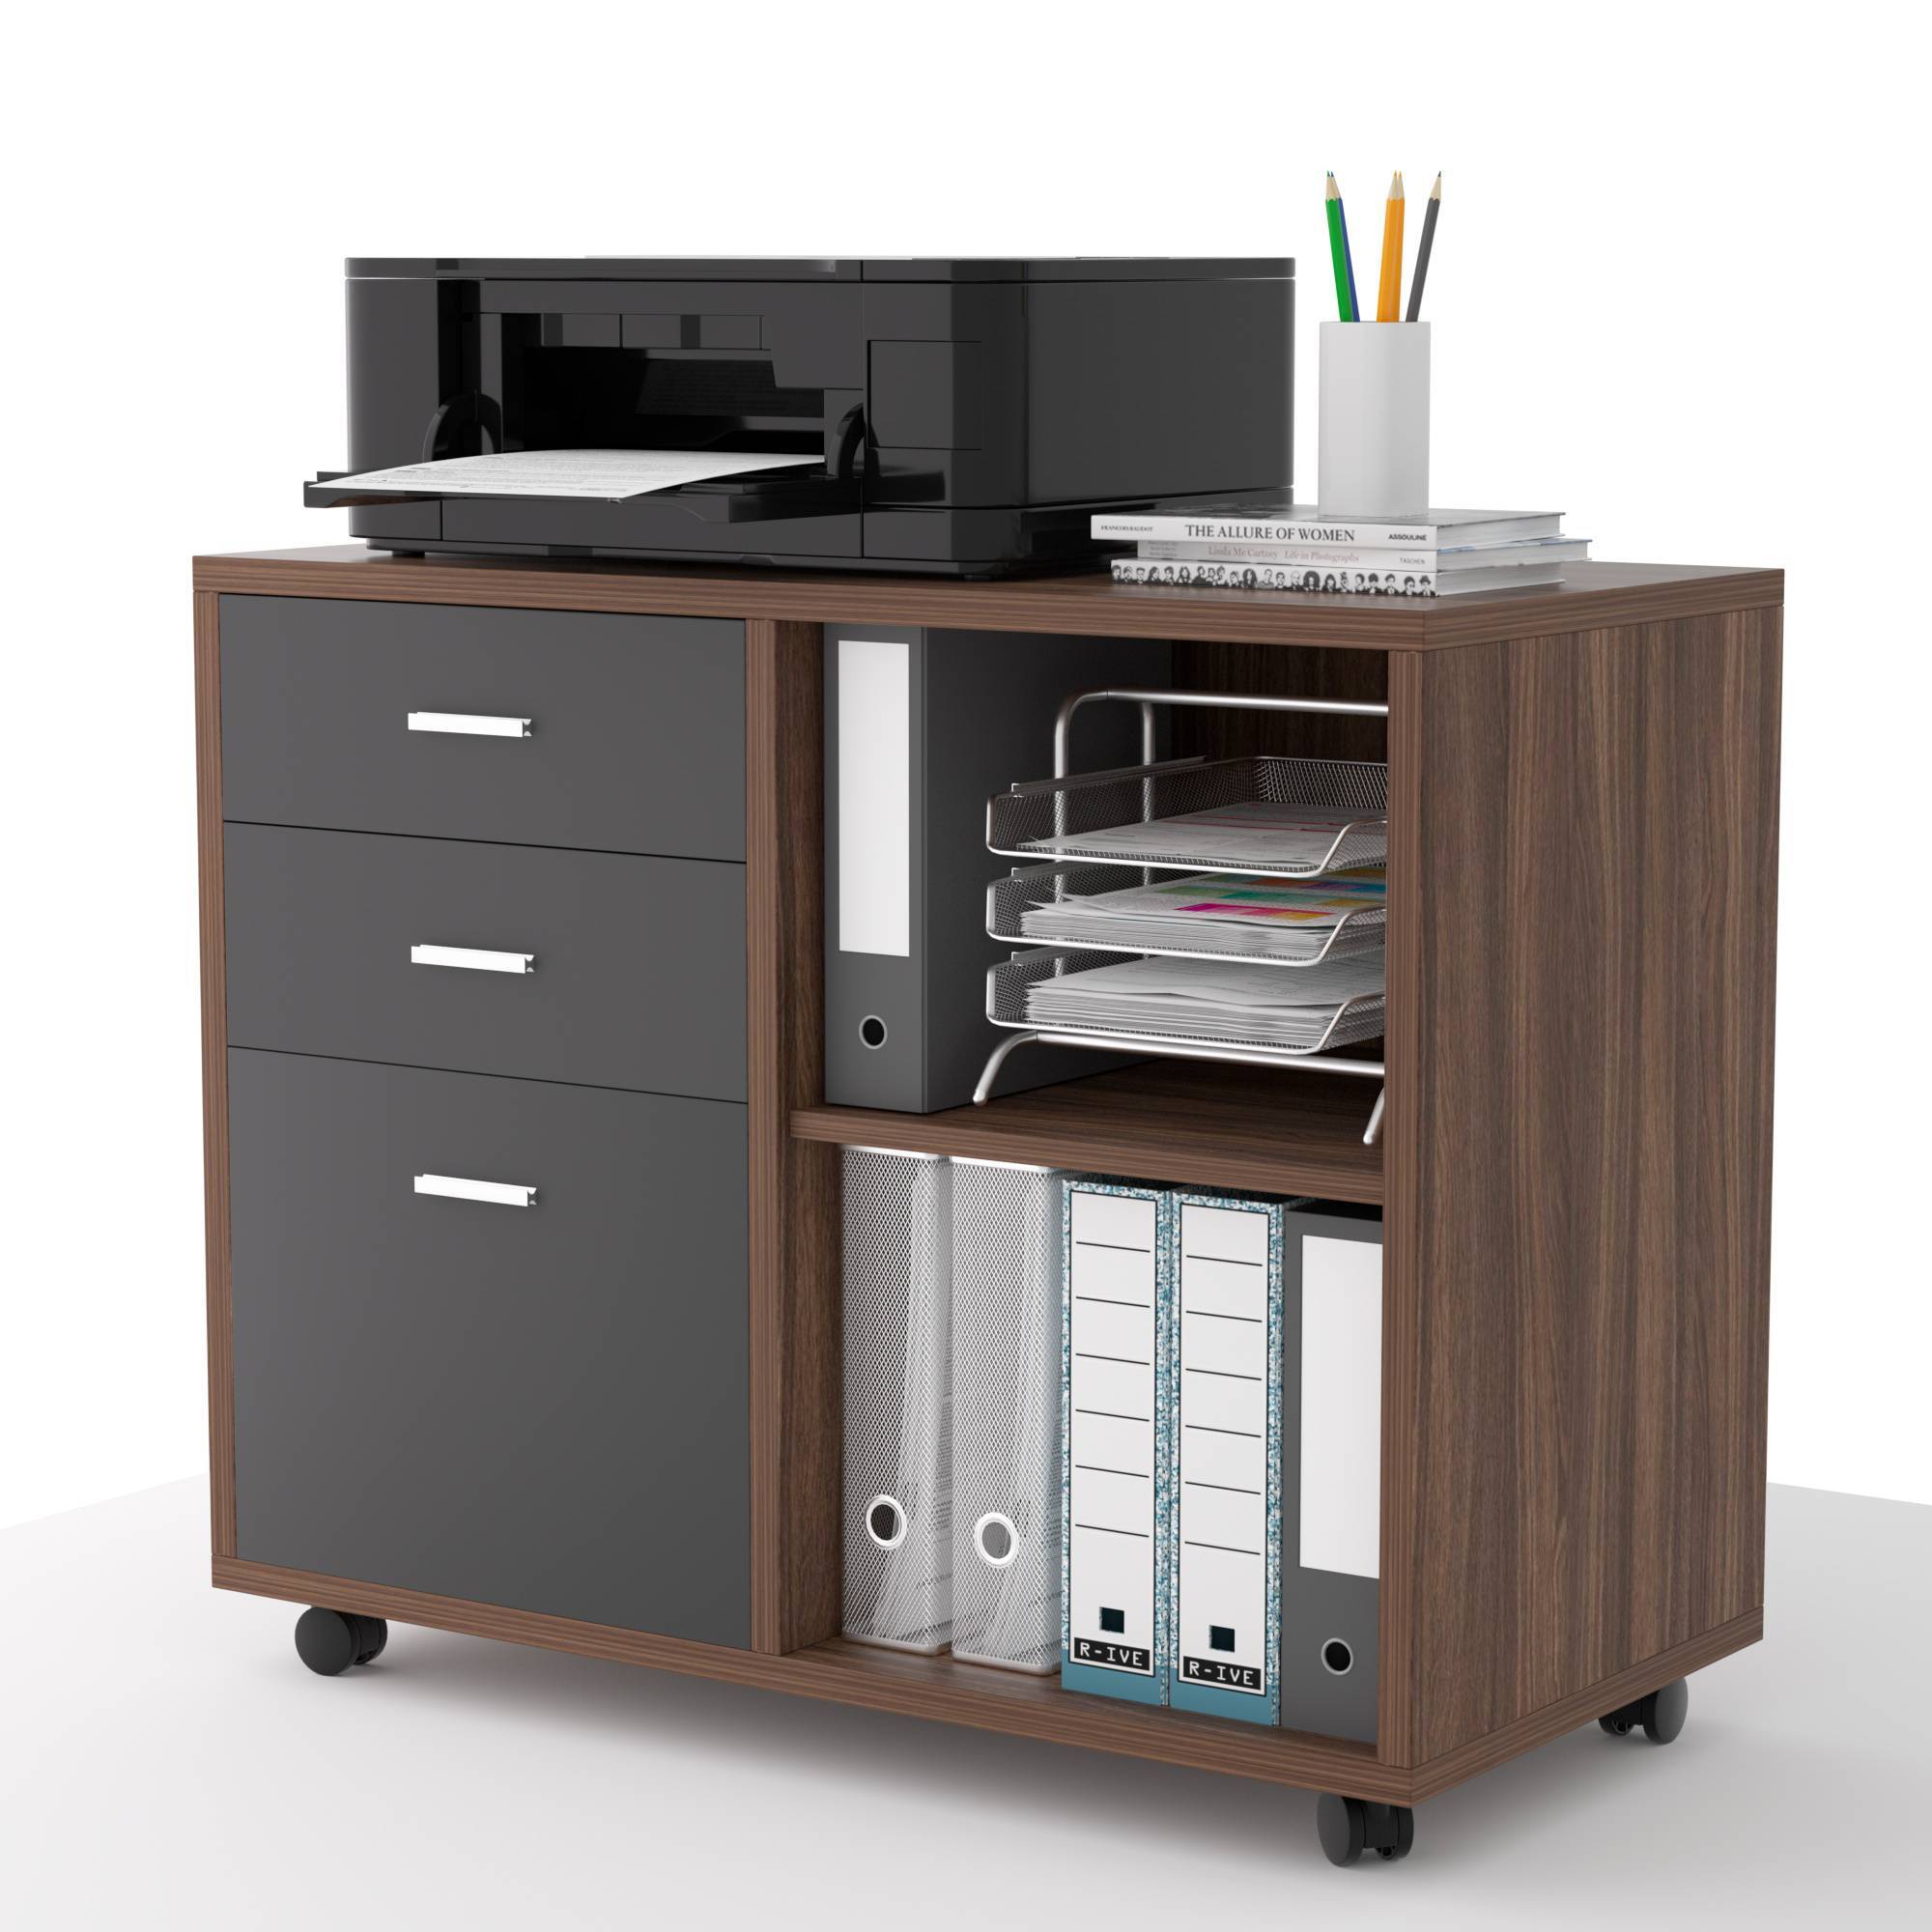 File Cabinet 3 -Drawer Mobile Lateral Filing Cabinet with Printer Stand Office File Cabinet 3 -Drawer Mobile Lateral Filing Cabinet with Printer Stand Office File Cabinet,Filing Cabinets,Office Furniture